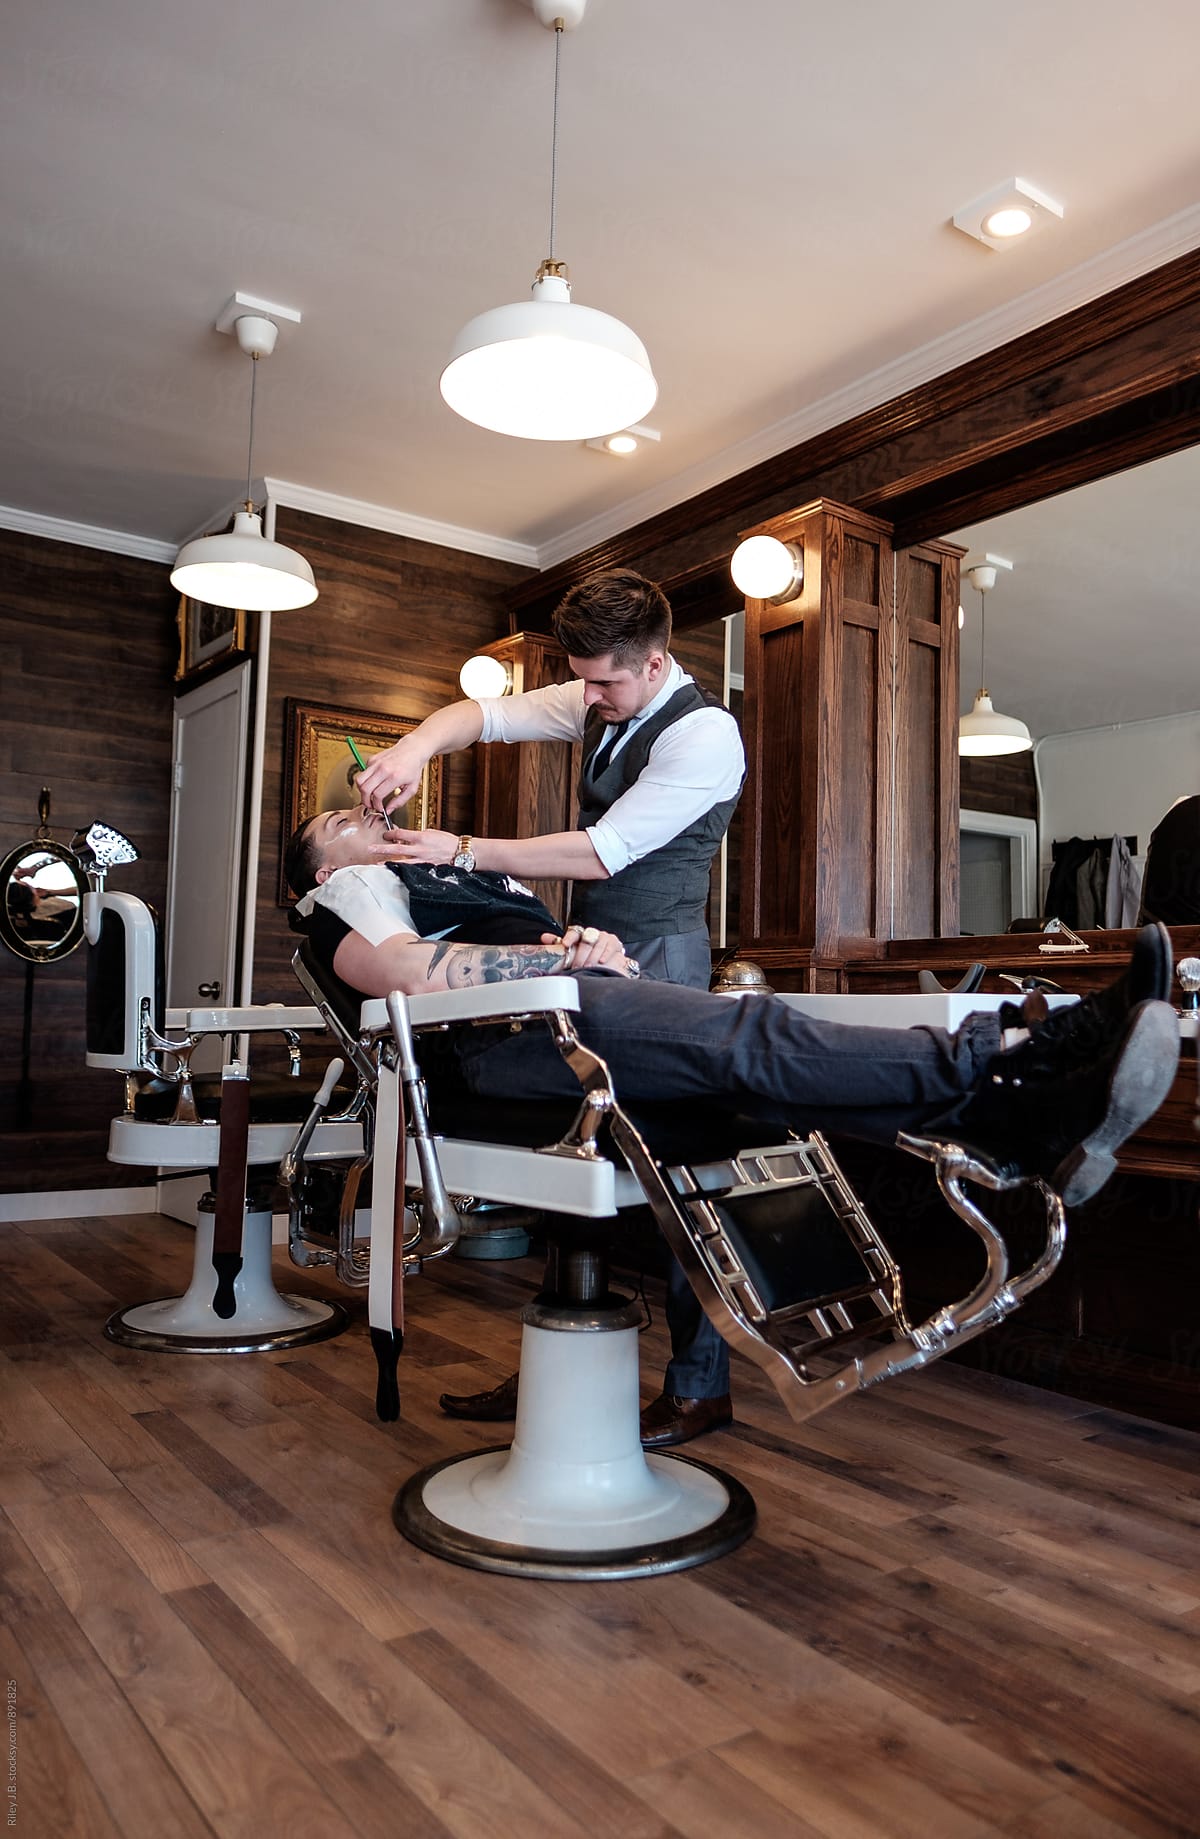 A client reclines in a vintage barber chair while receiving a classic